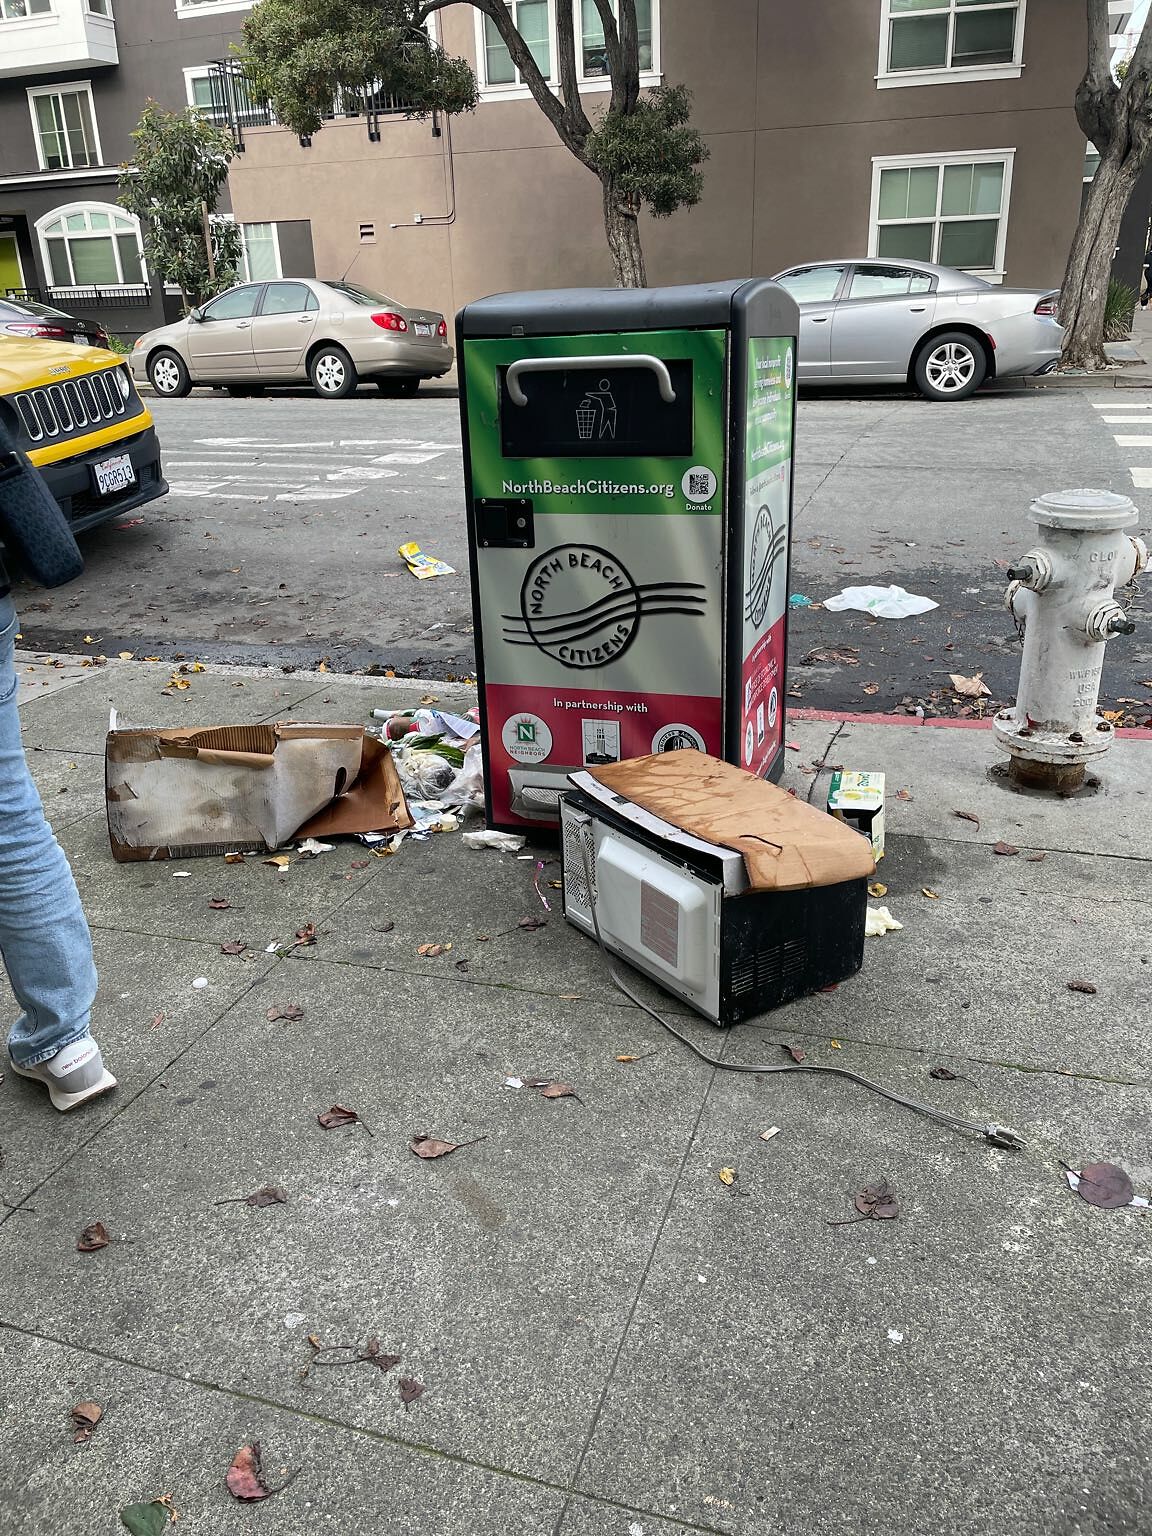 A microwave sits in front of a trash can on a public street.